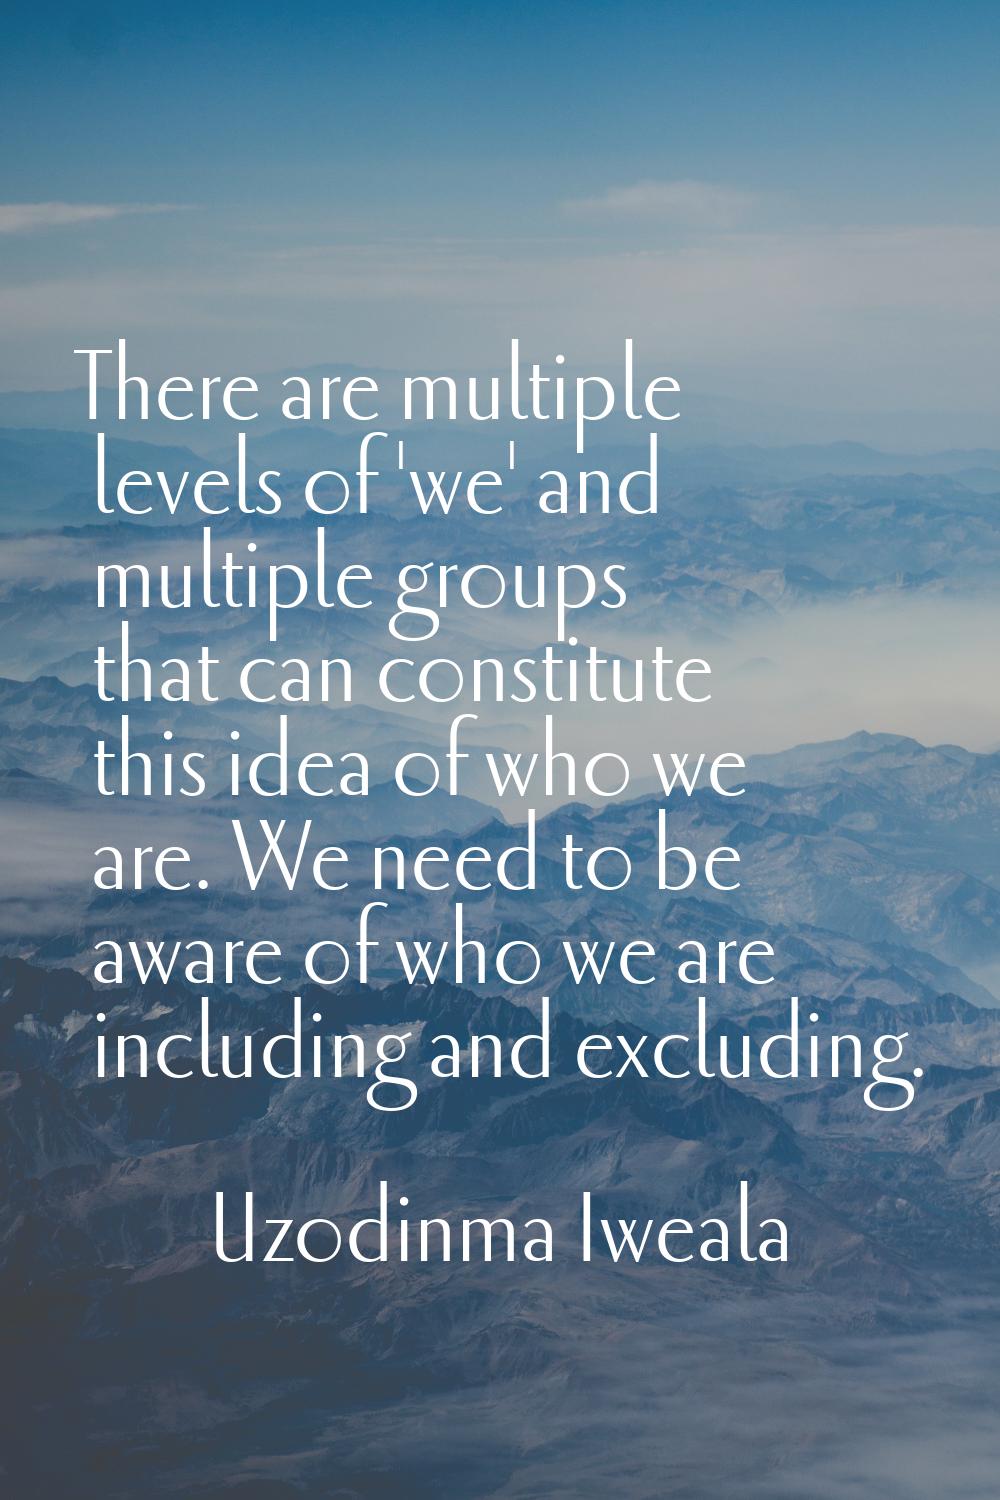 There are multiple levels of 'we' and multiple groups that can constitute this idea of who we are. 